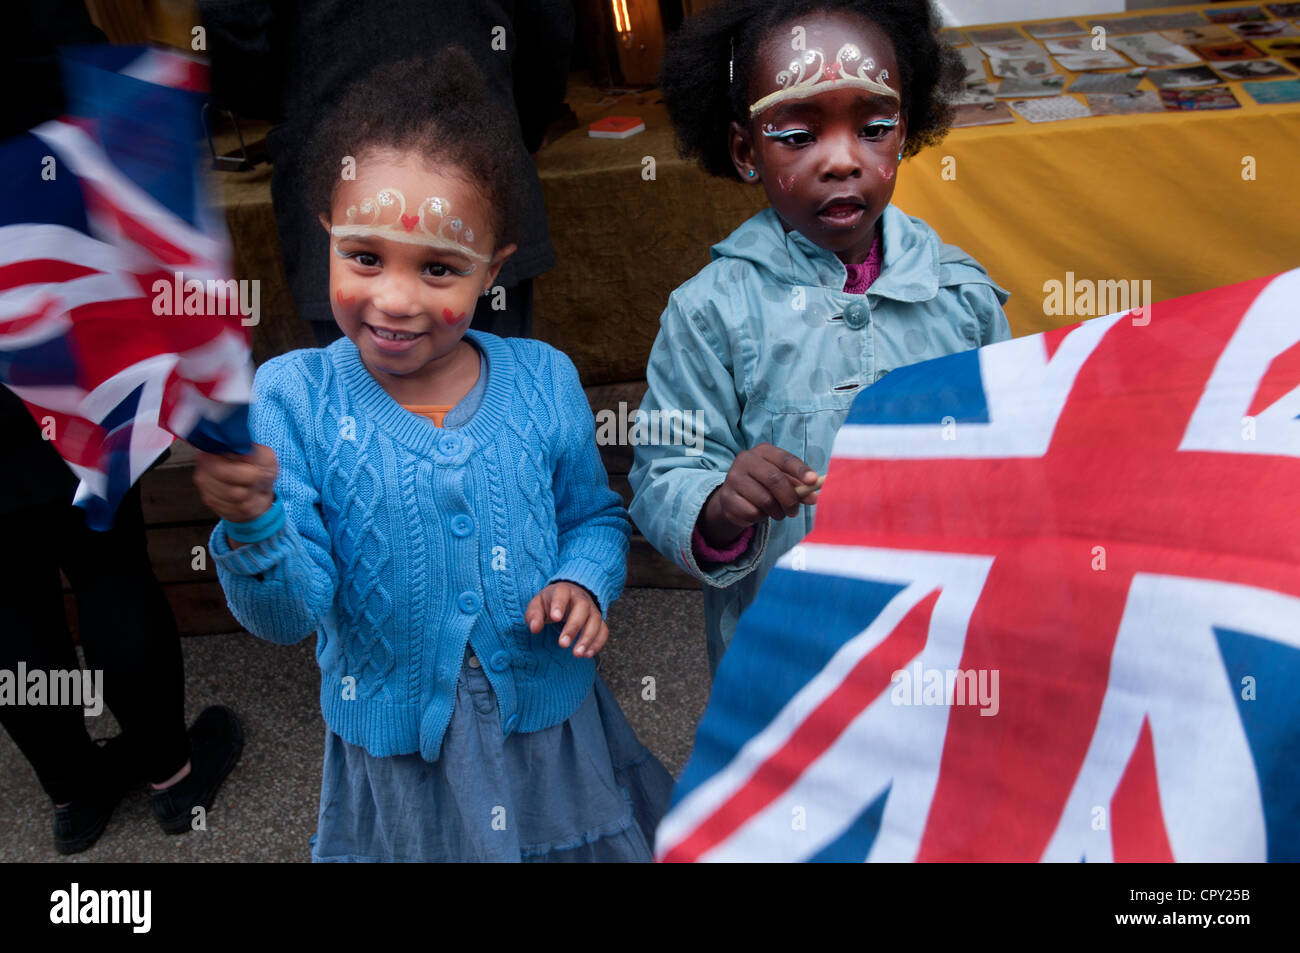 Rivington Street party, Shoreditch, London. Two young girls waving union jacks and face paint tiaras Stock Photo